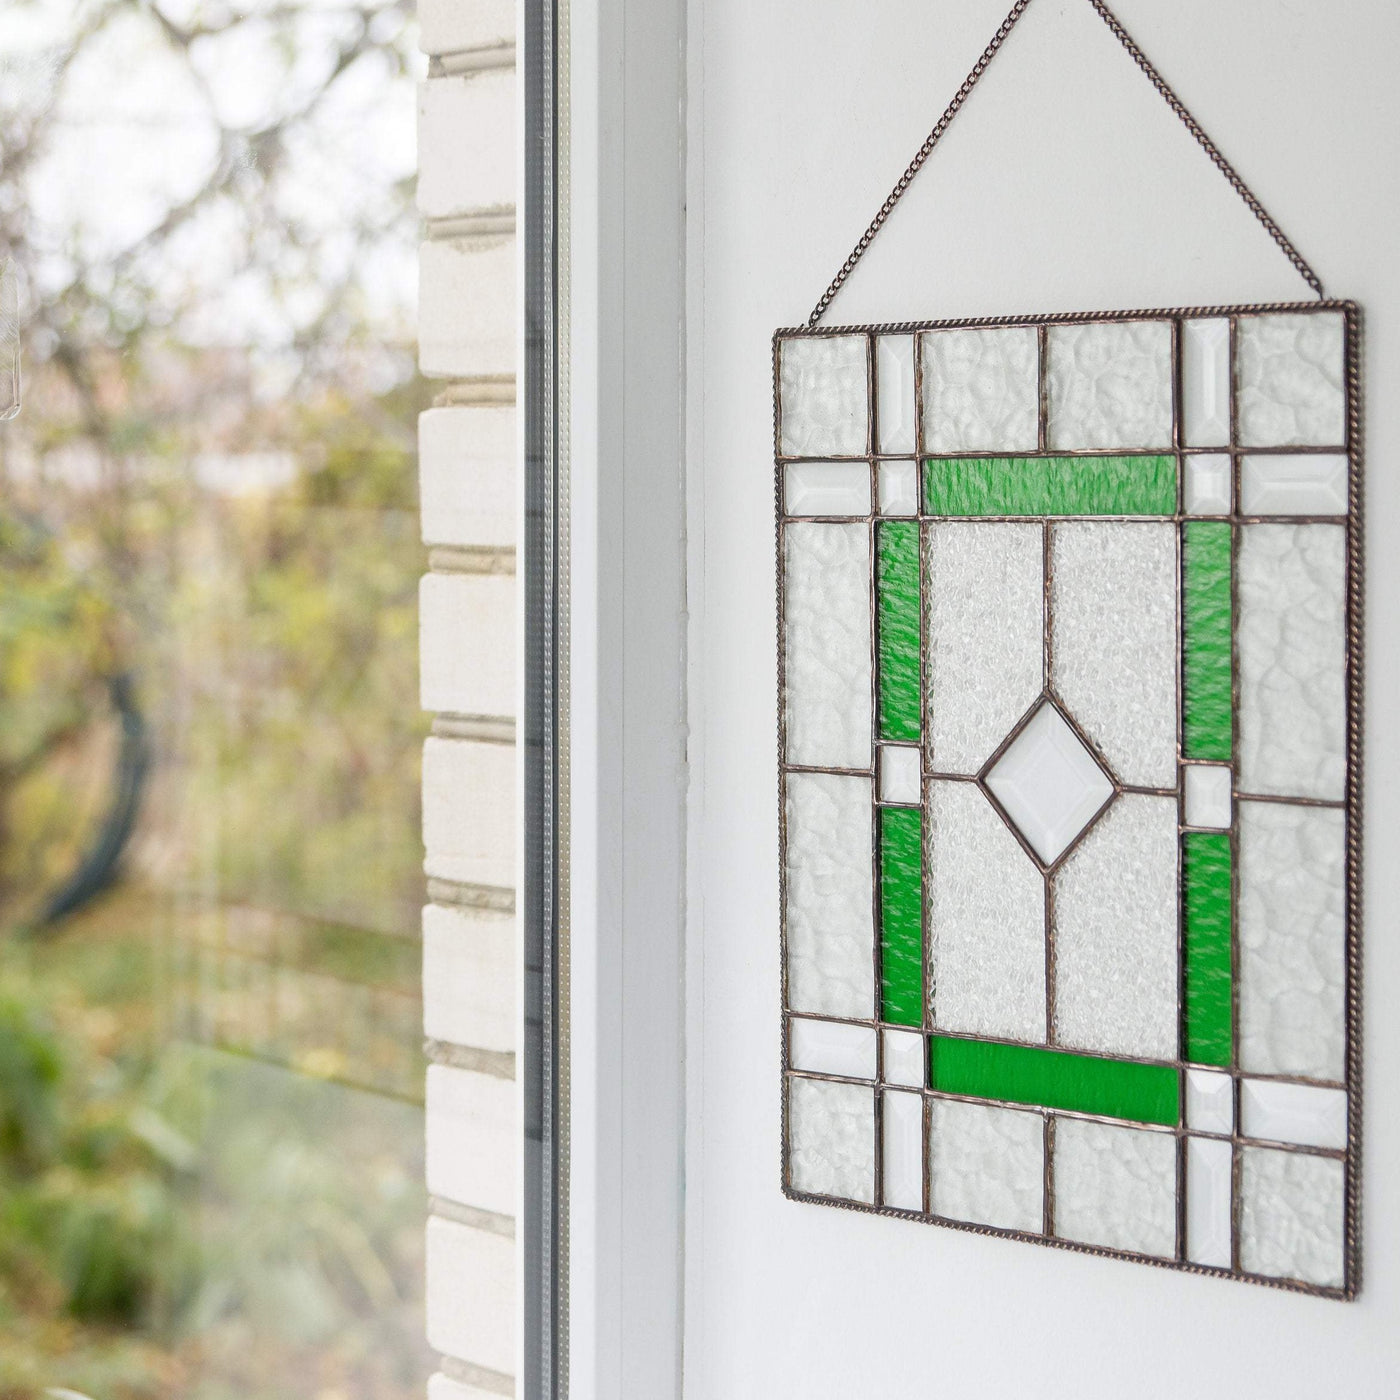 Stained glass clear panel with green and beveled inserts for home decoration